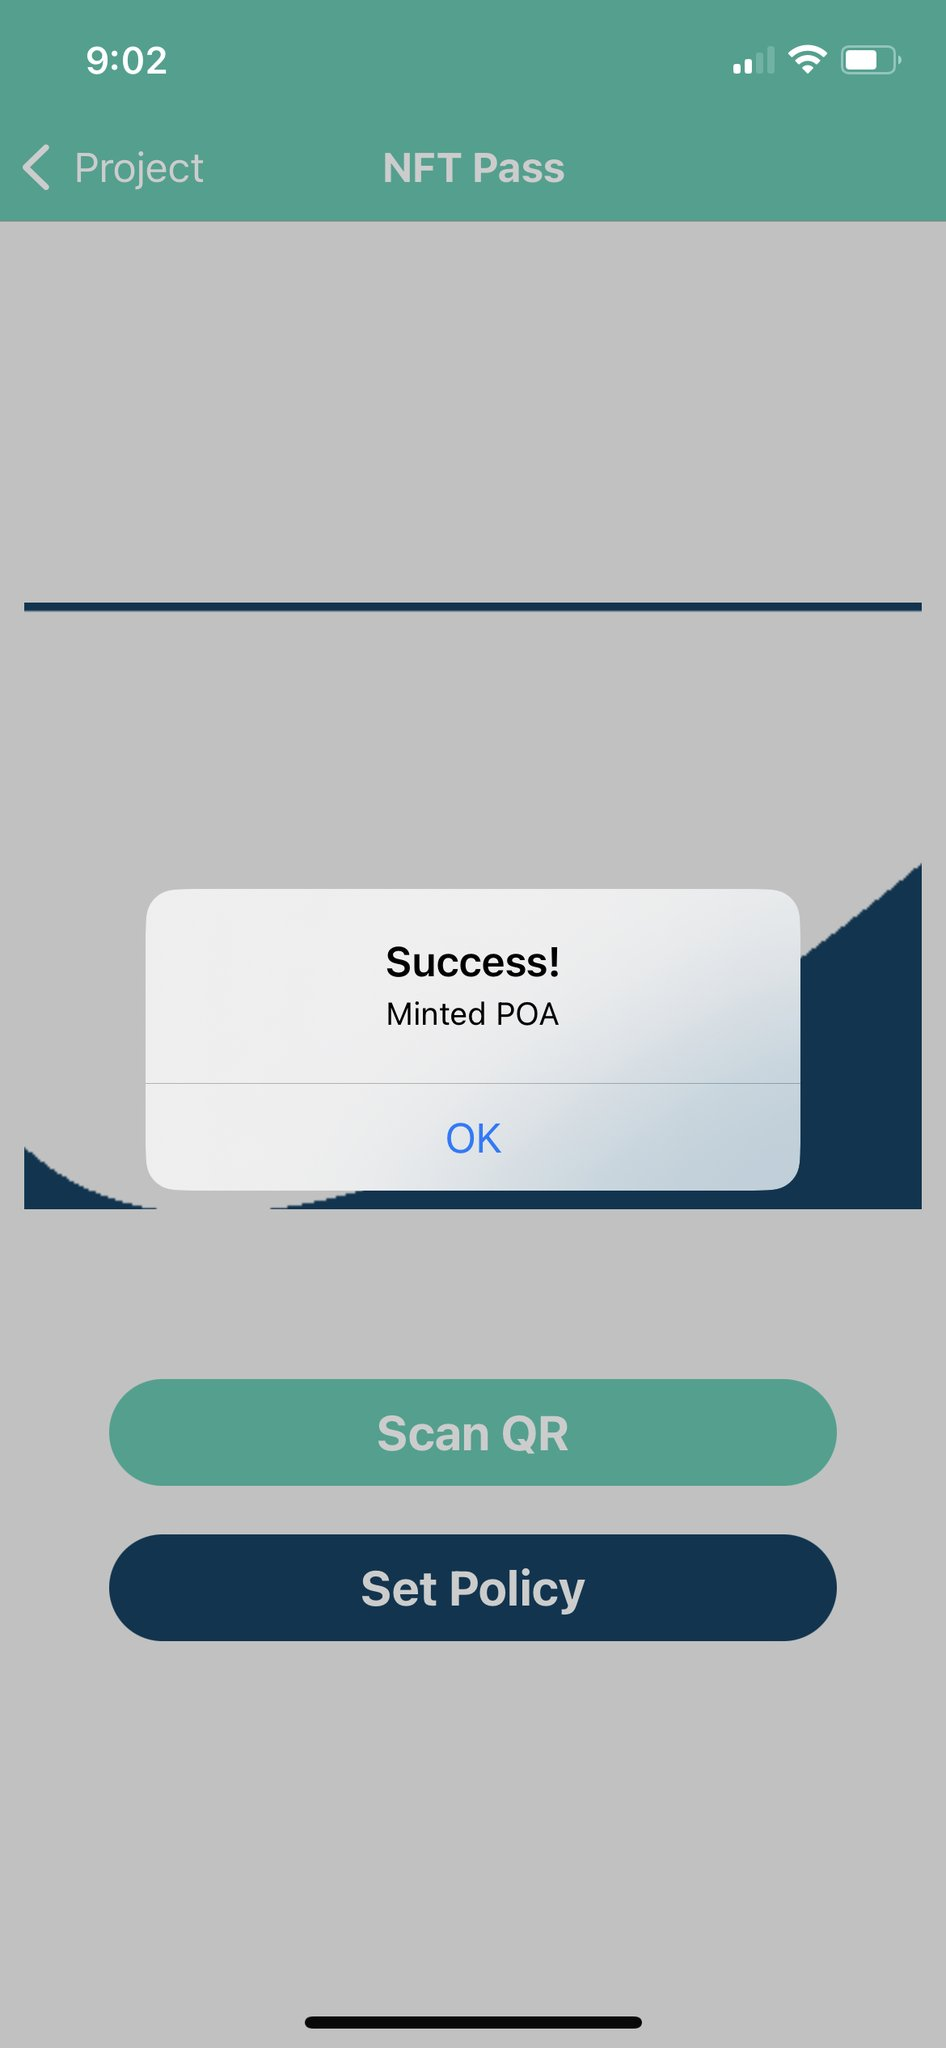 NFTPass App Displaying message “Success! Minted POA”